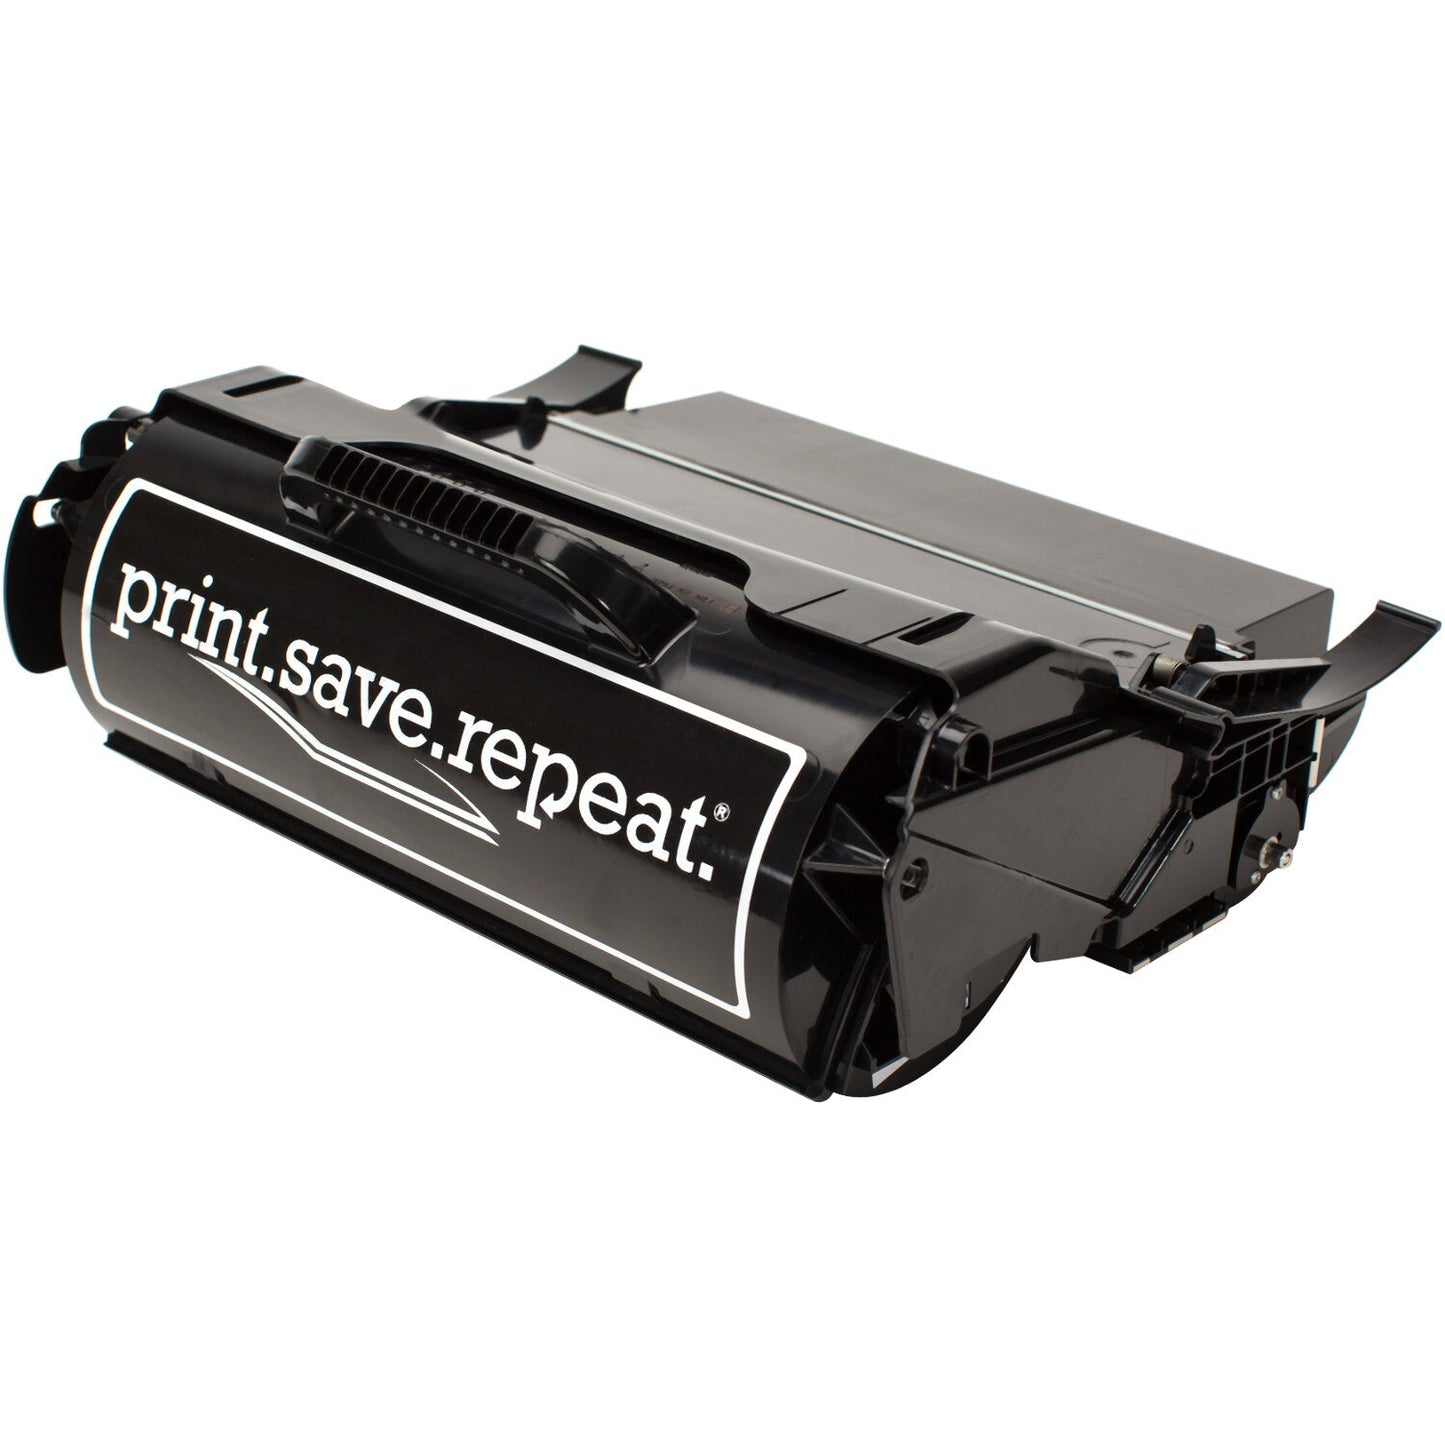 Print.Save.Repeat. InfoPrint 39V2513 High Yield Remanufactured Toner Cartridge for 1832, 1852, 1872, 1892 [25,000 Pages]